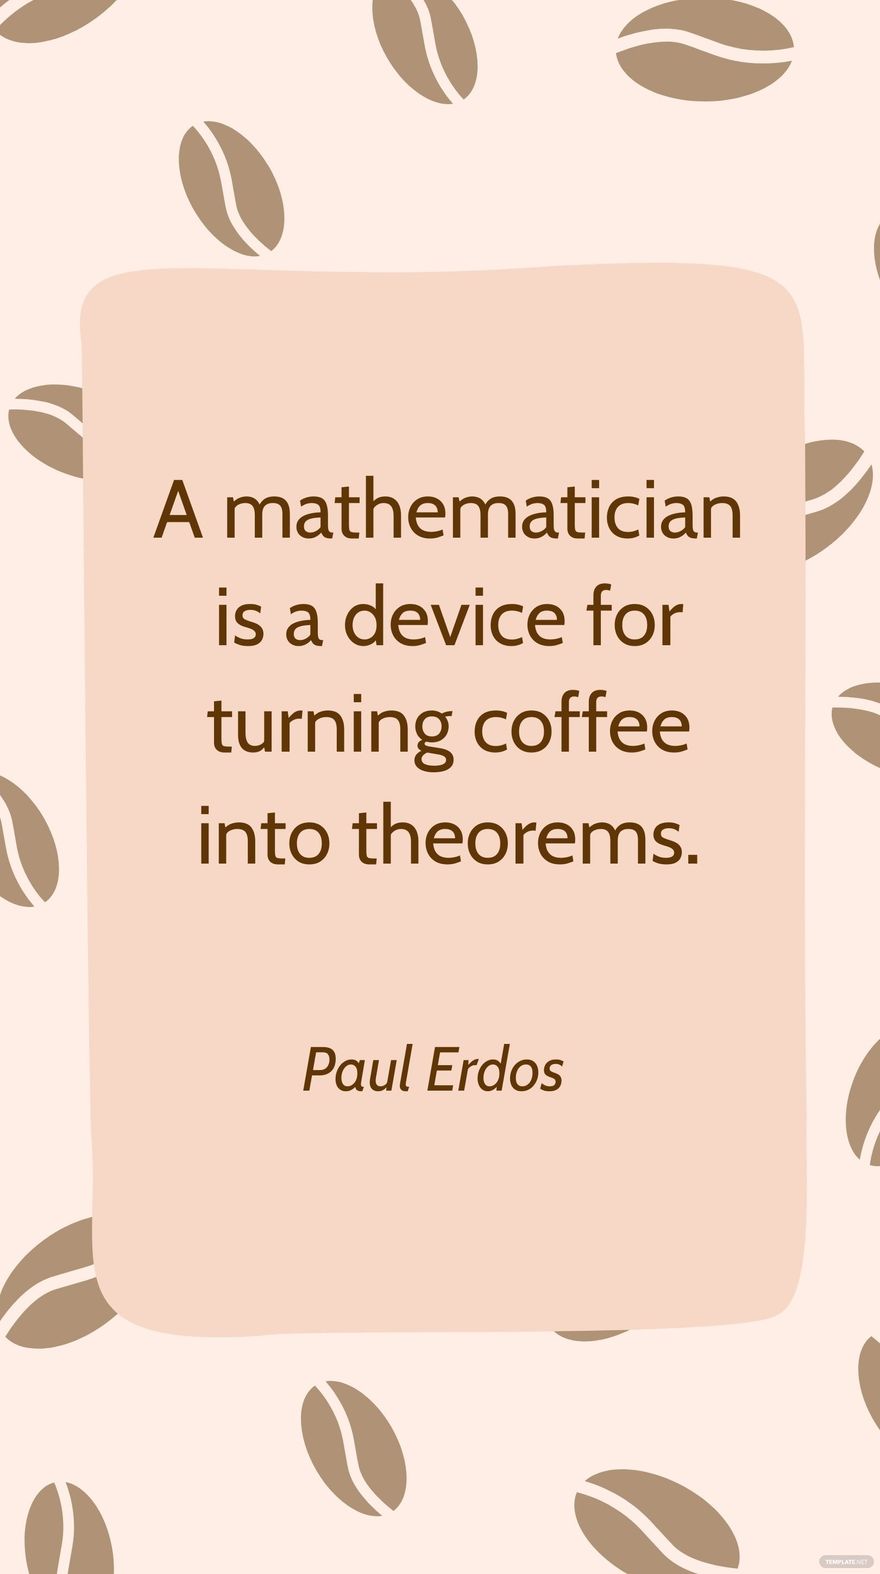 Paul Erdos - A mathematician is a device for turning coffee into theorems. in JPG